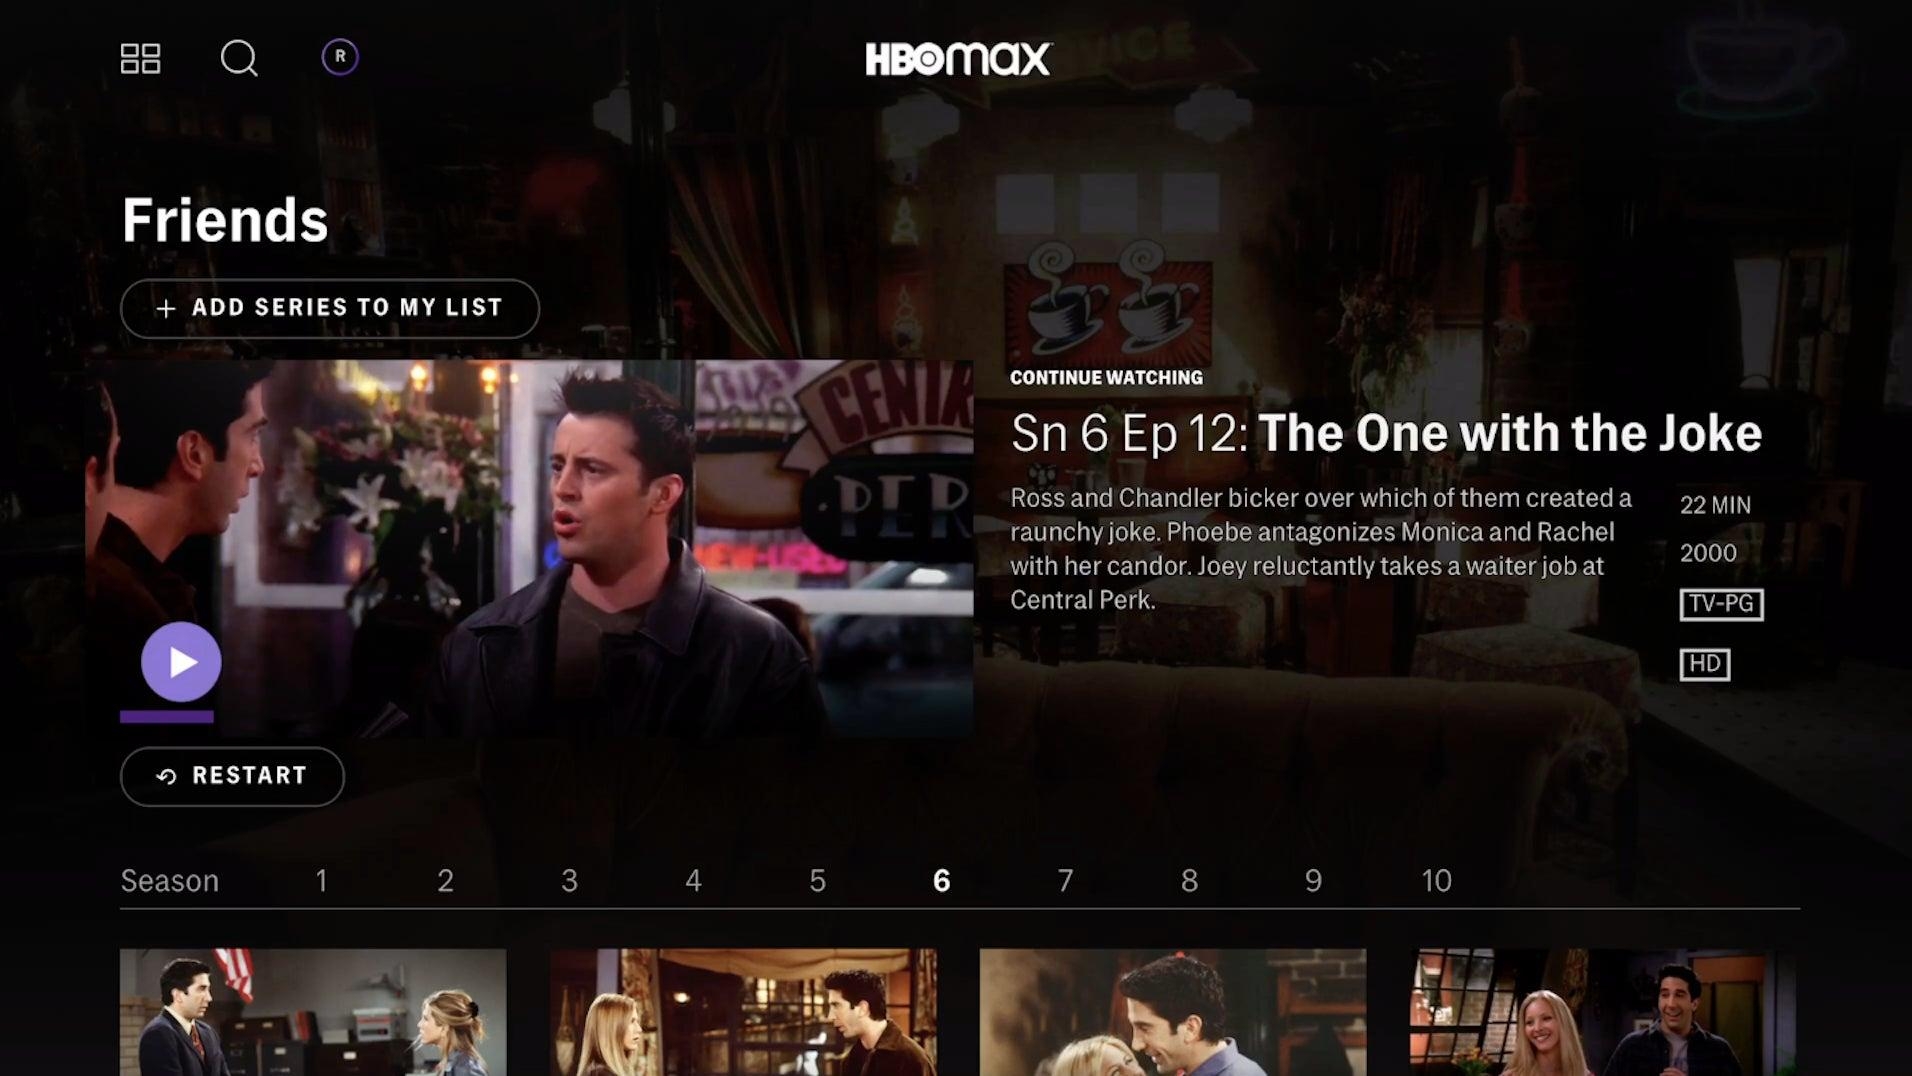 UPDATED: Users say that HBO Max, which costs $15 a month, has been broken for a week